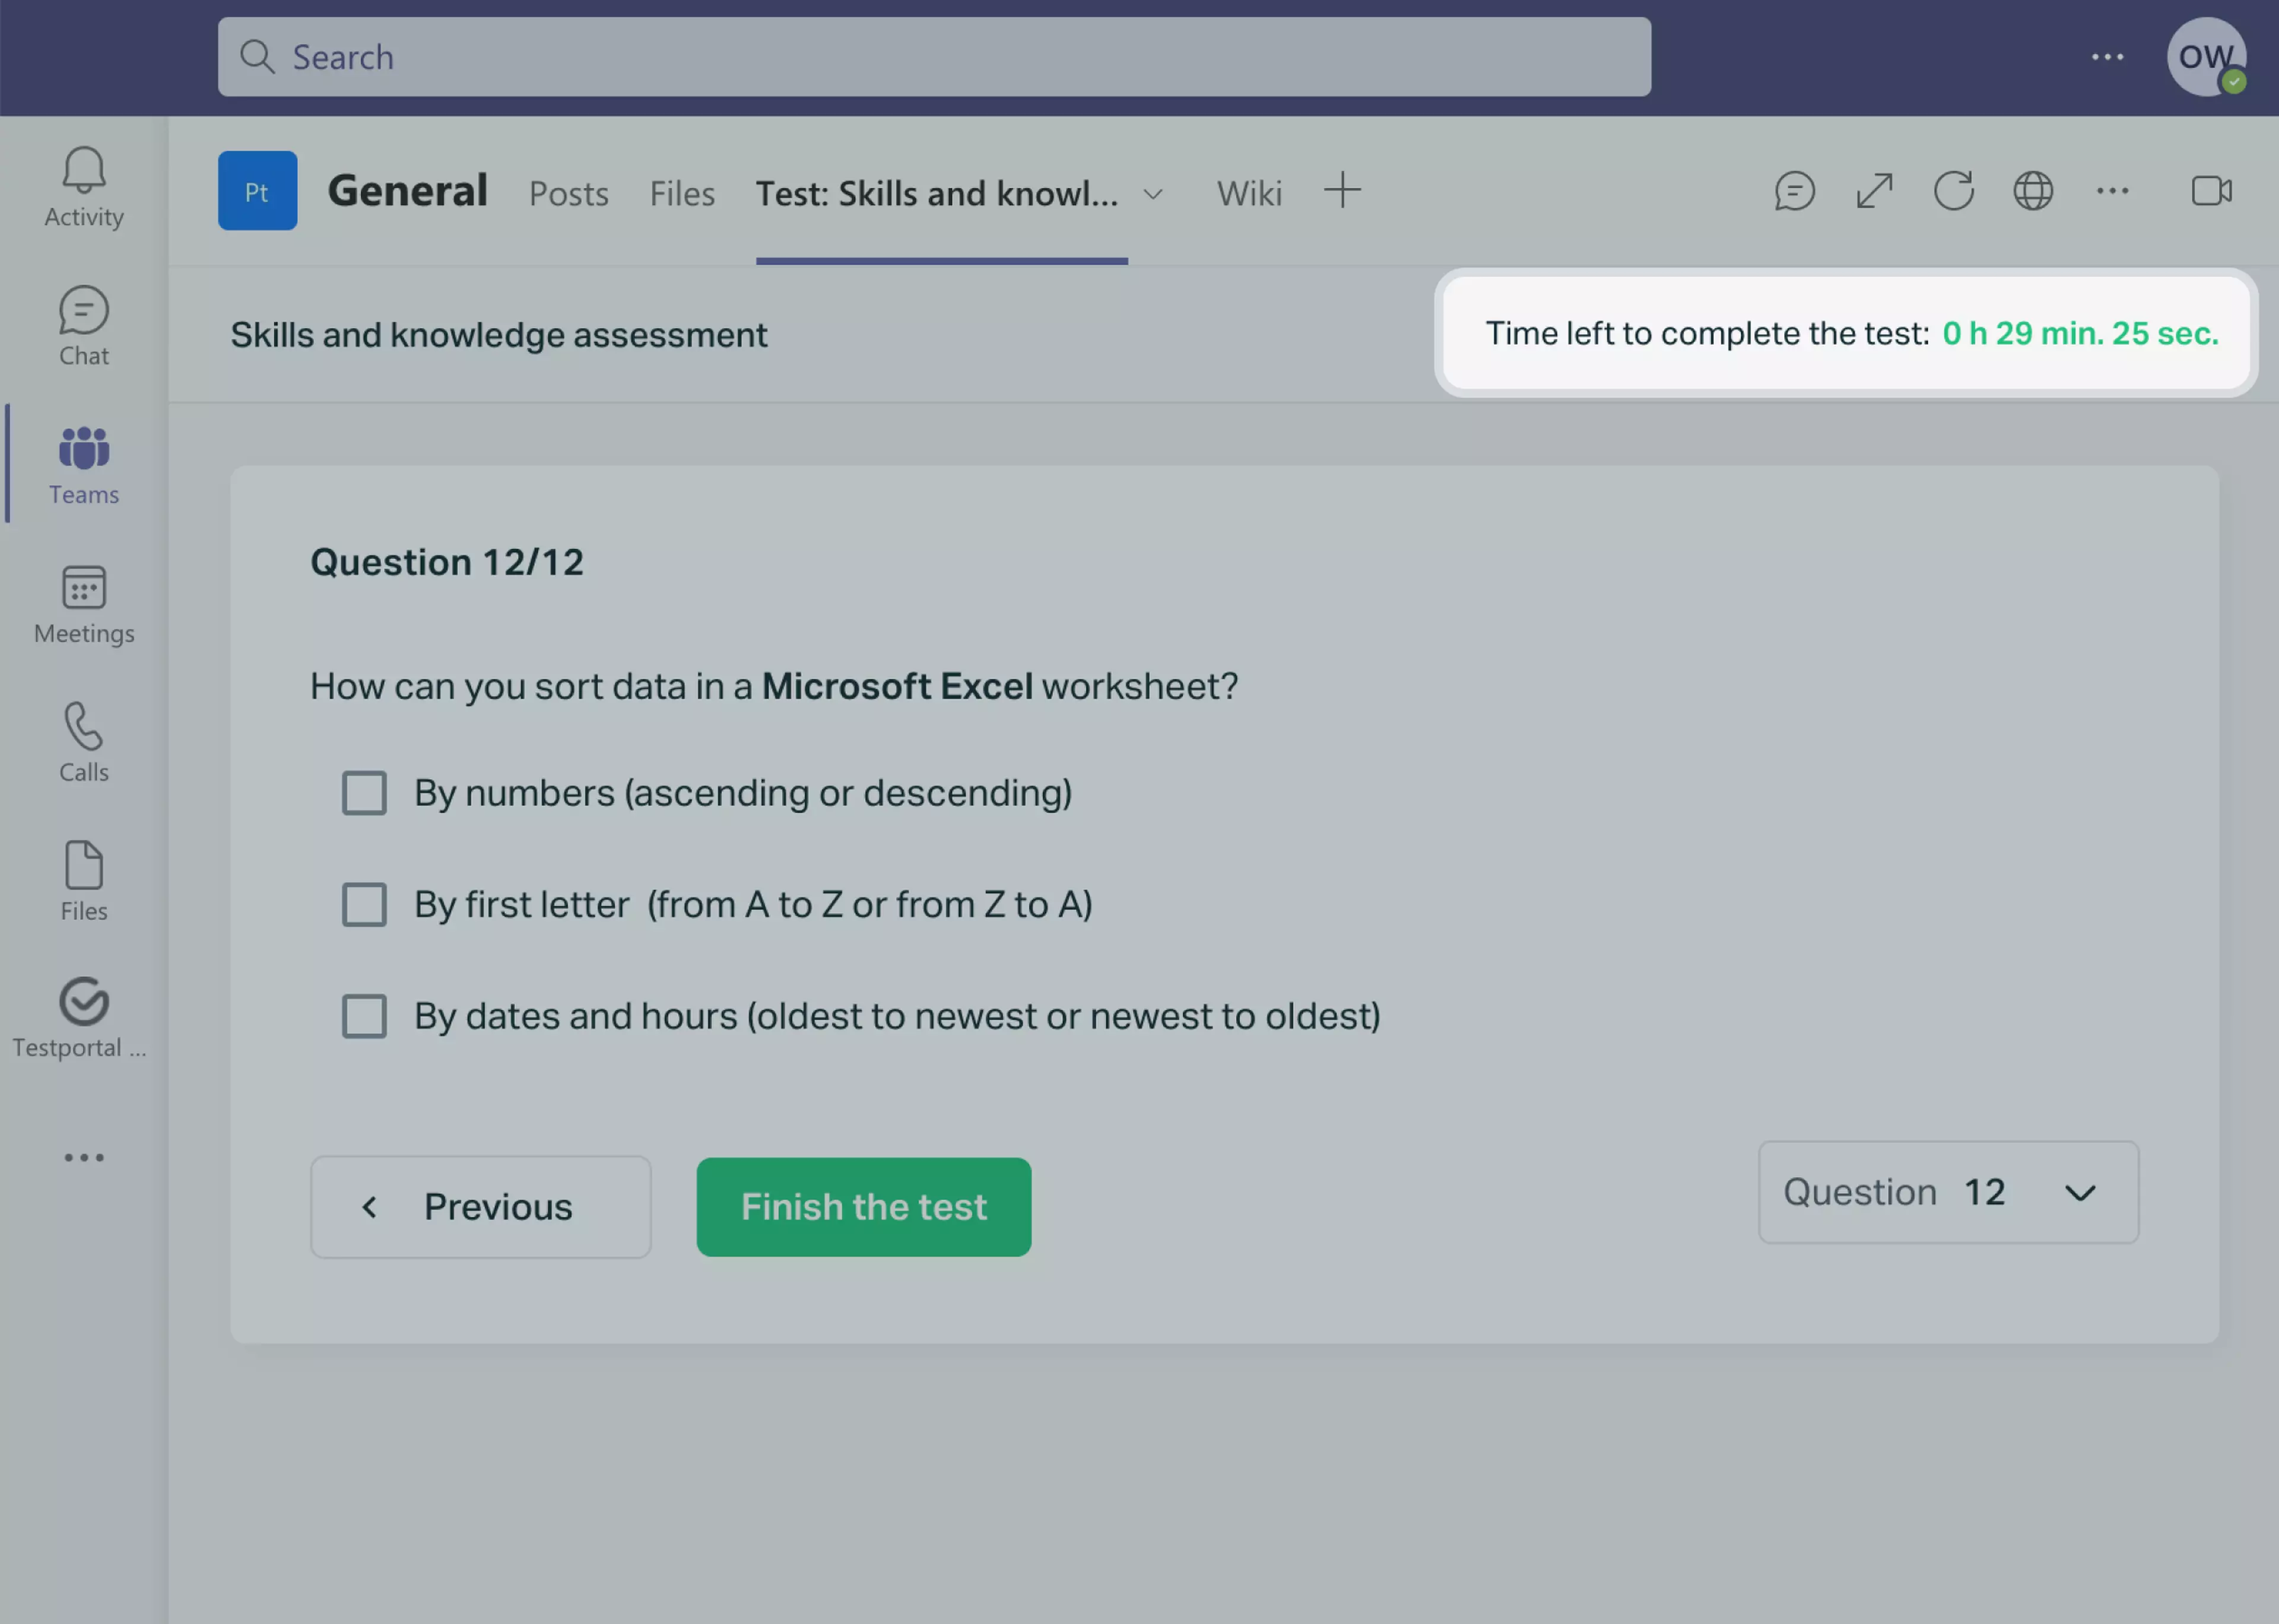   Testportal for Microsoft Teams app view showing a question and time left to complete the test.